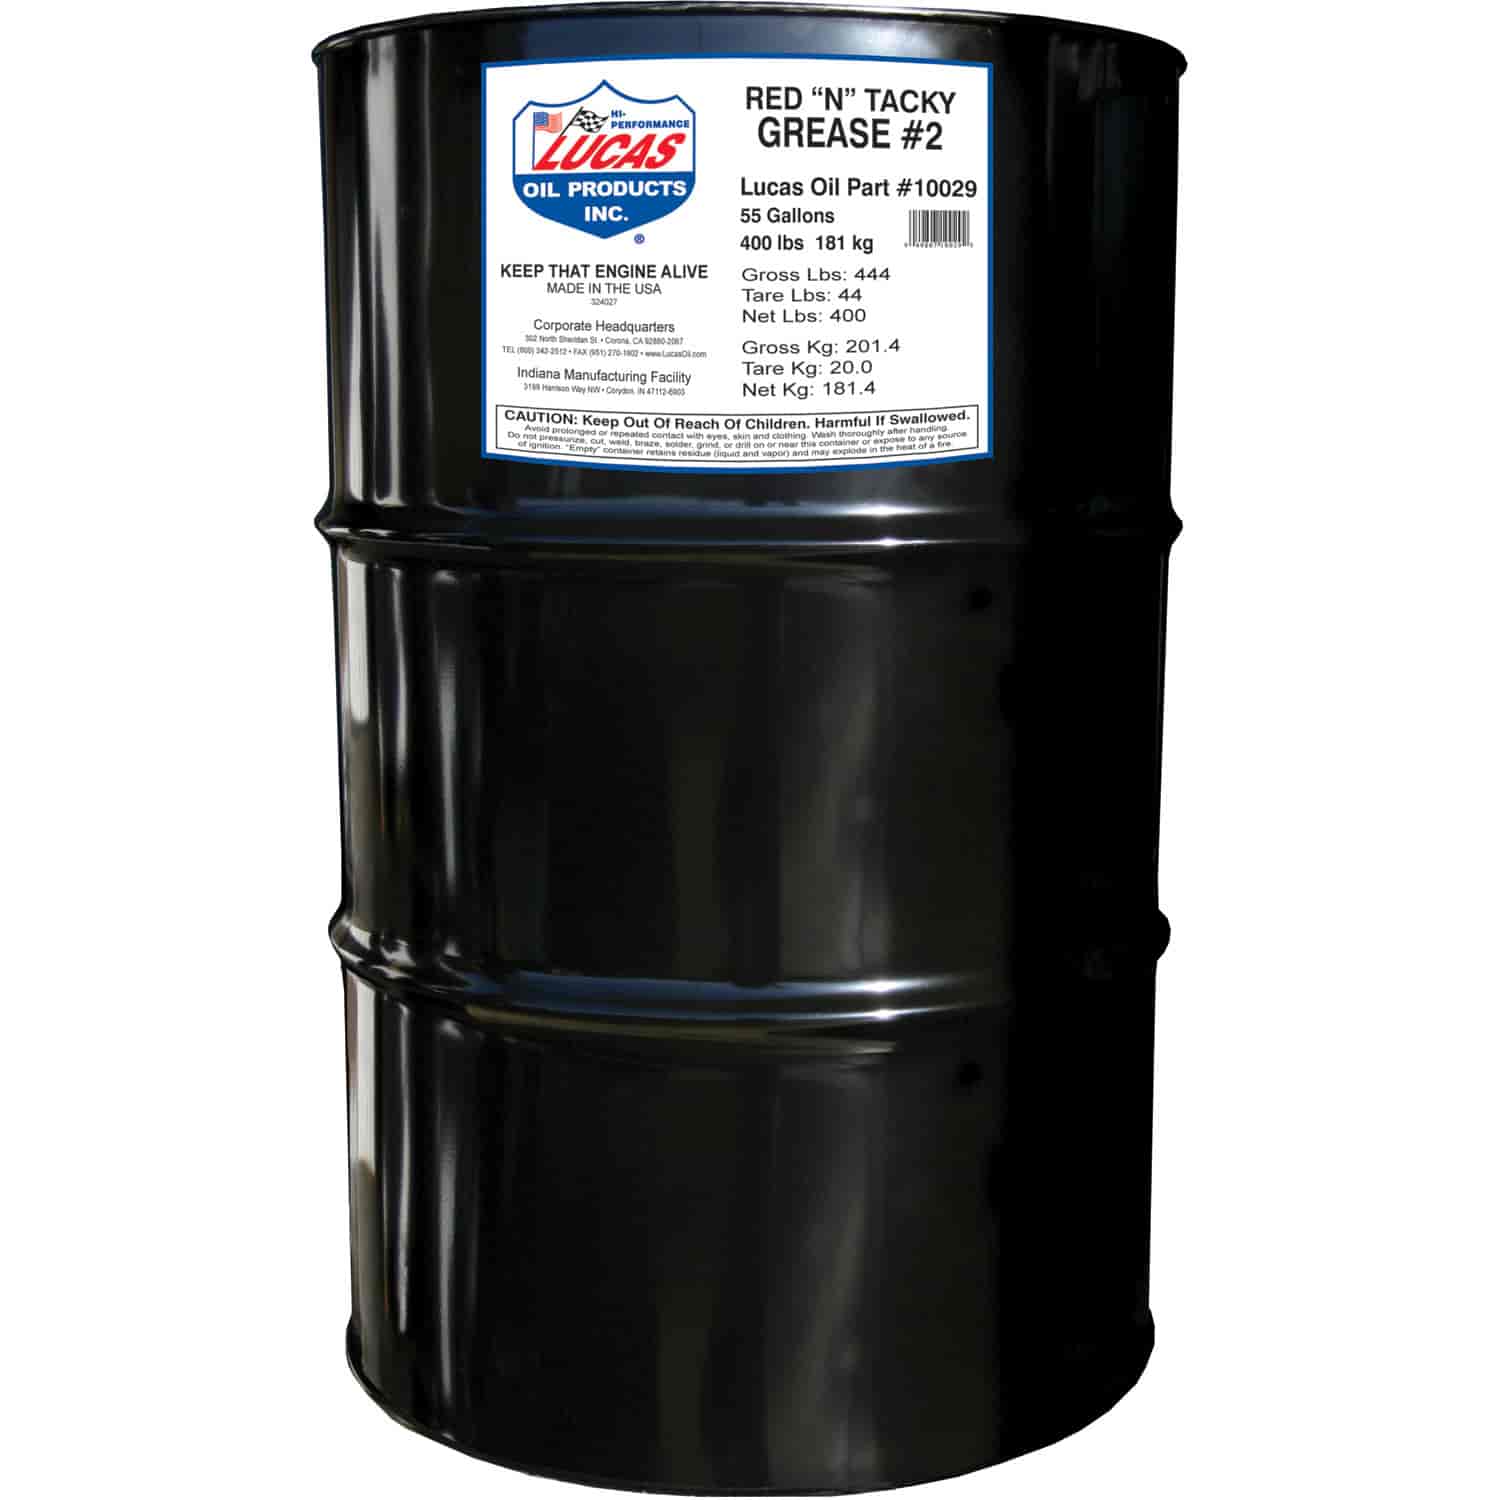 Red "N" Tacky Grease 400 lb. Drum